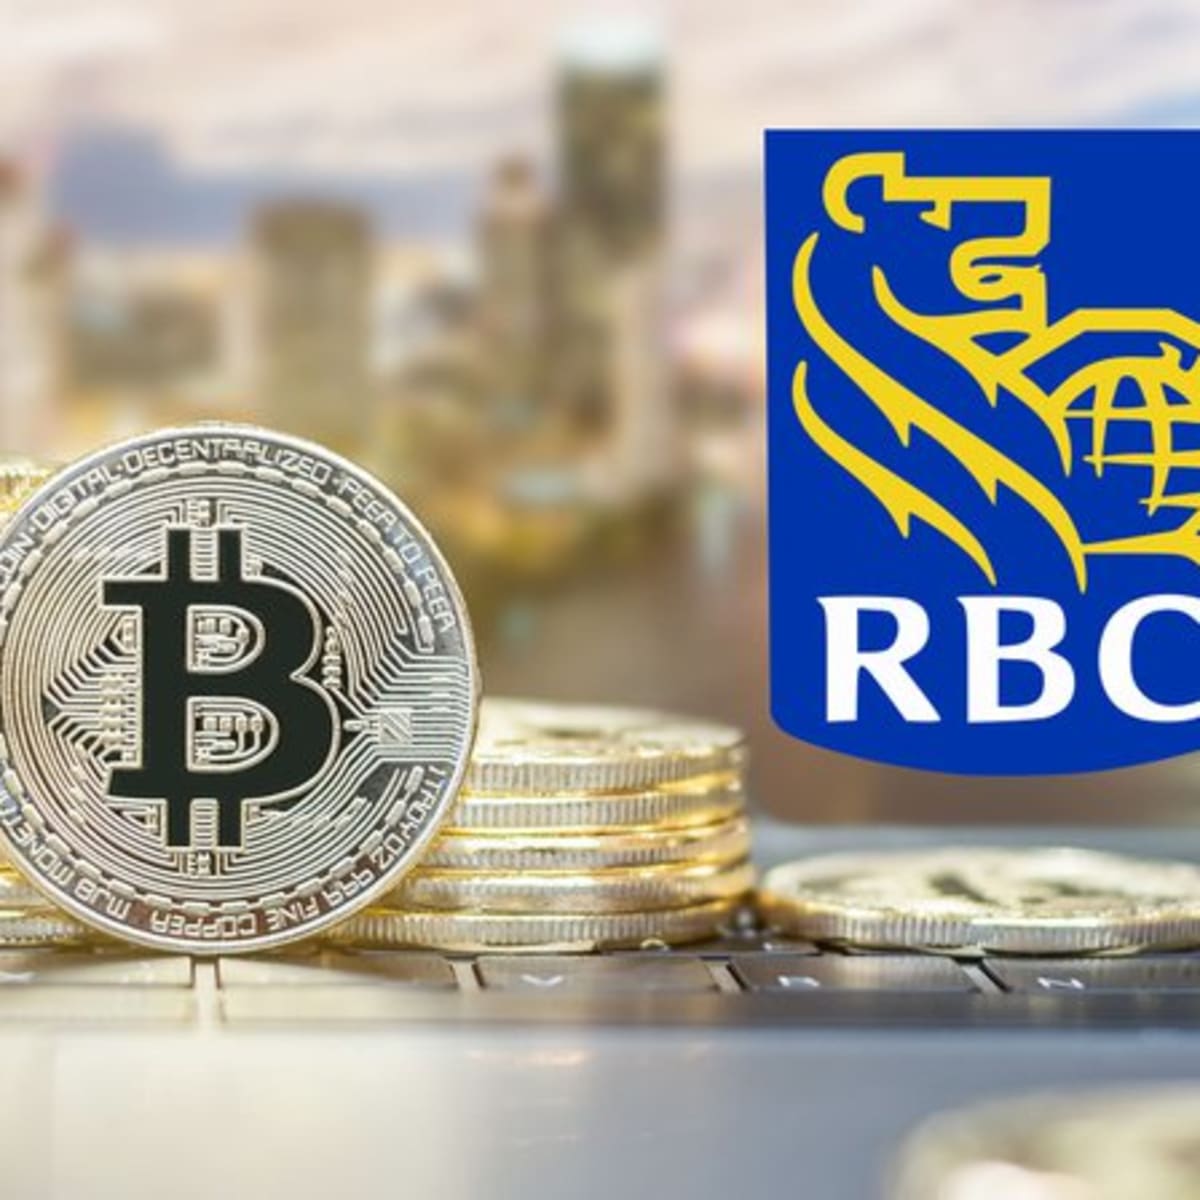 Rbc cryptocurrency betting odds nfl playoffs 2022